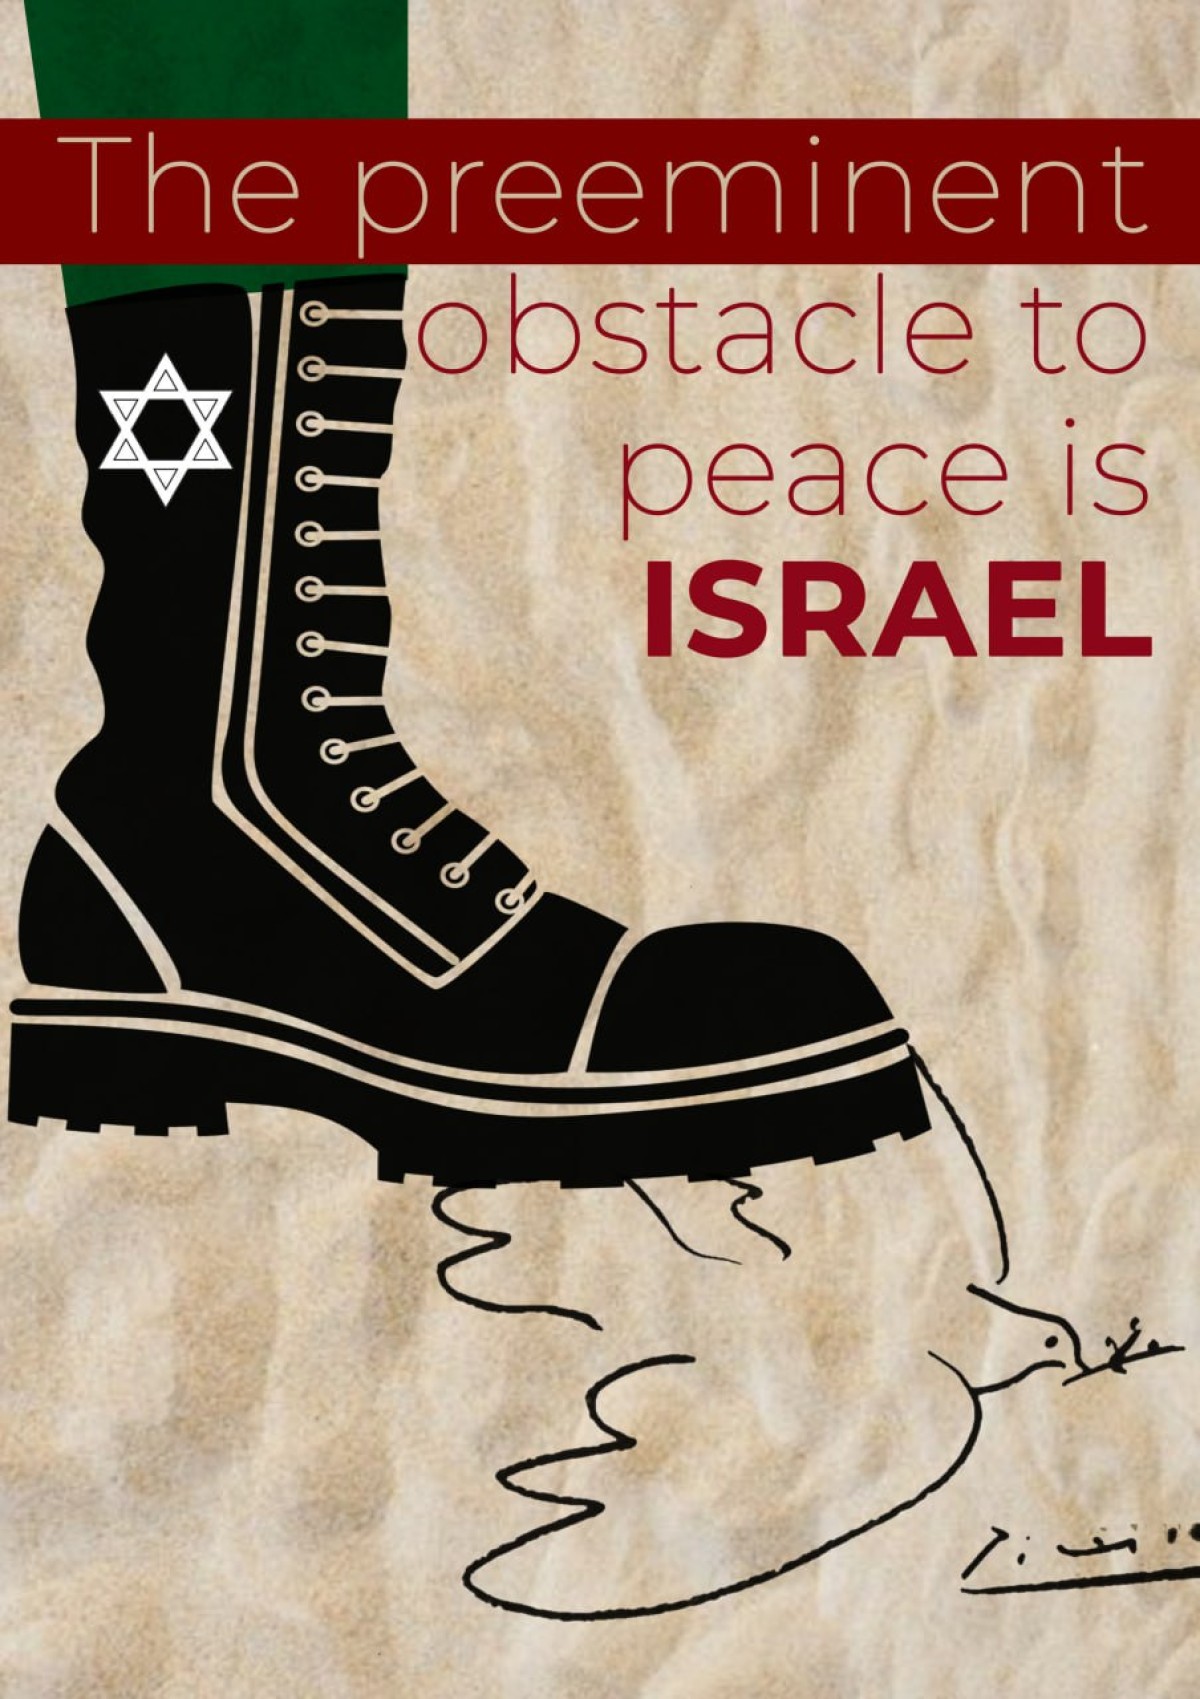 The preeminent obstacle to peace is ISRAEL